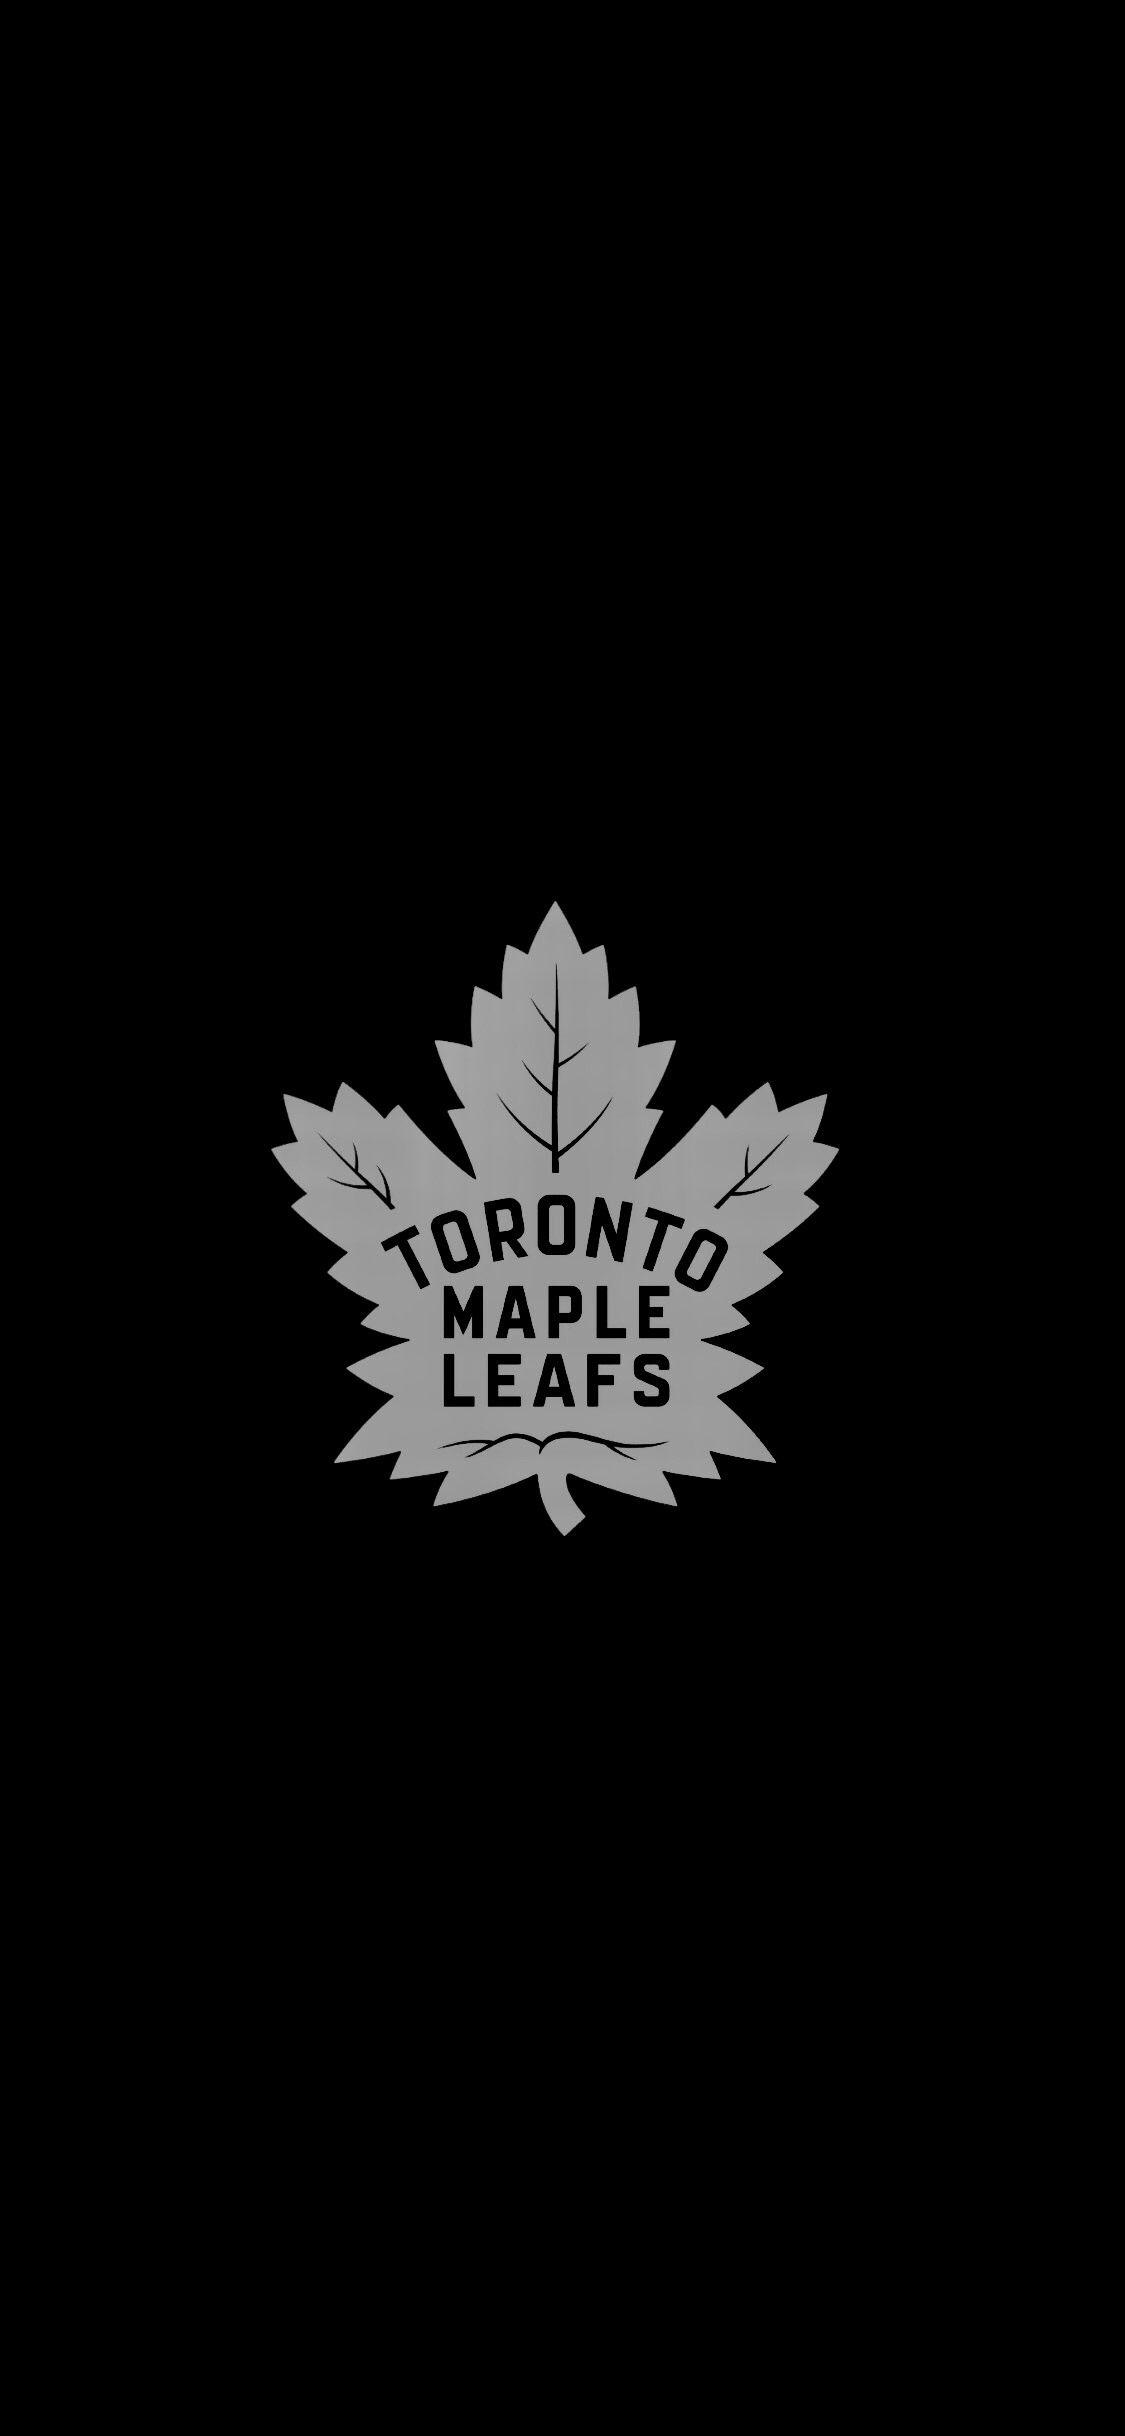 Maple leafs iphone HD wallpapers